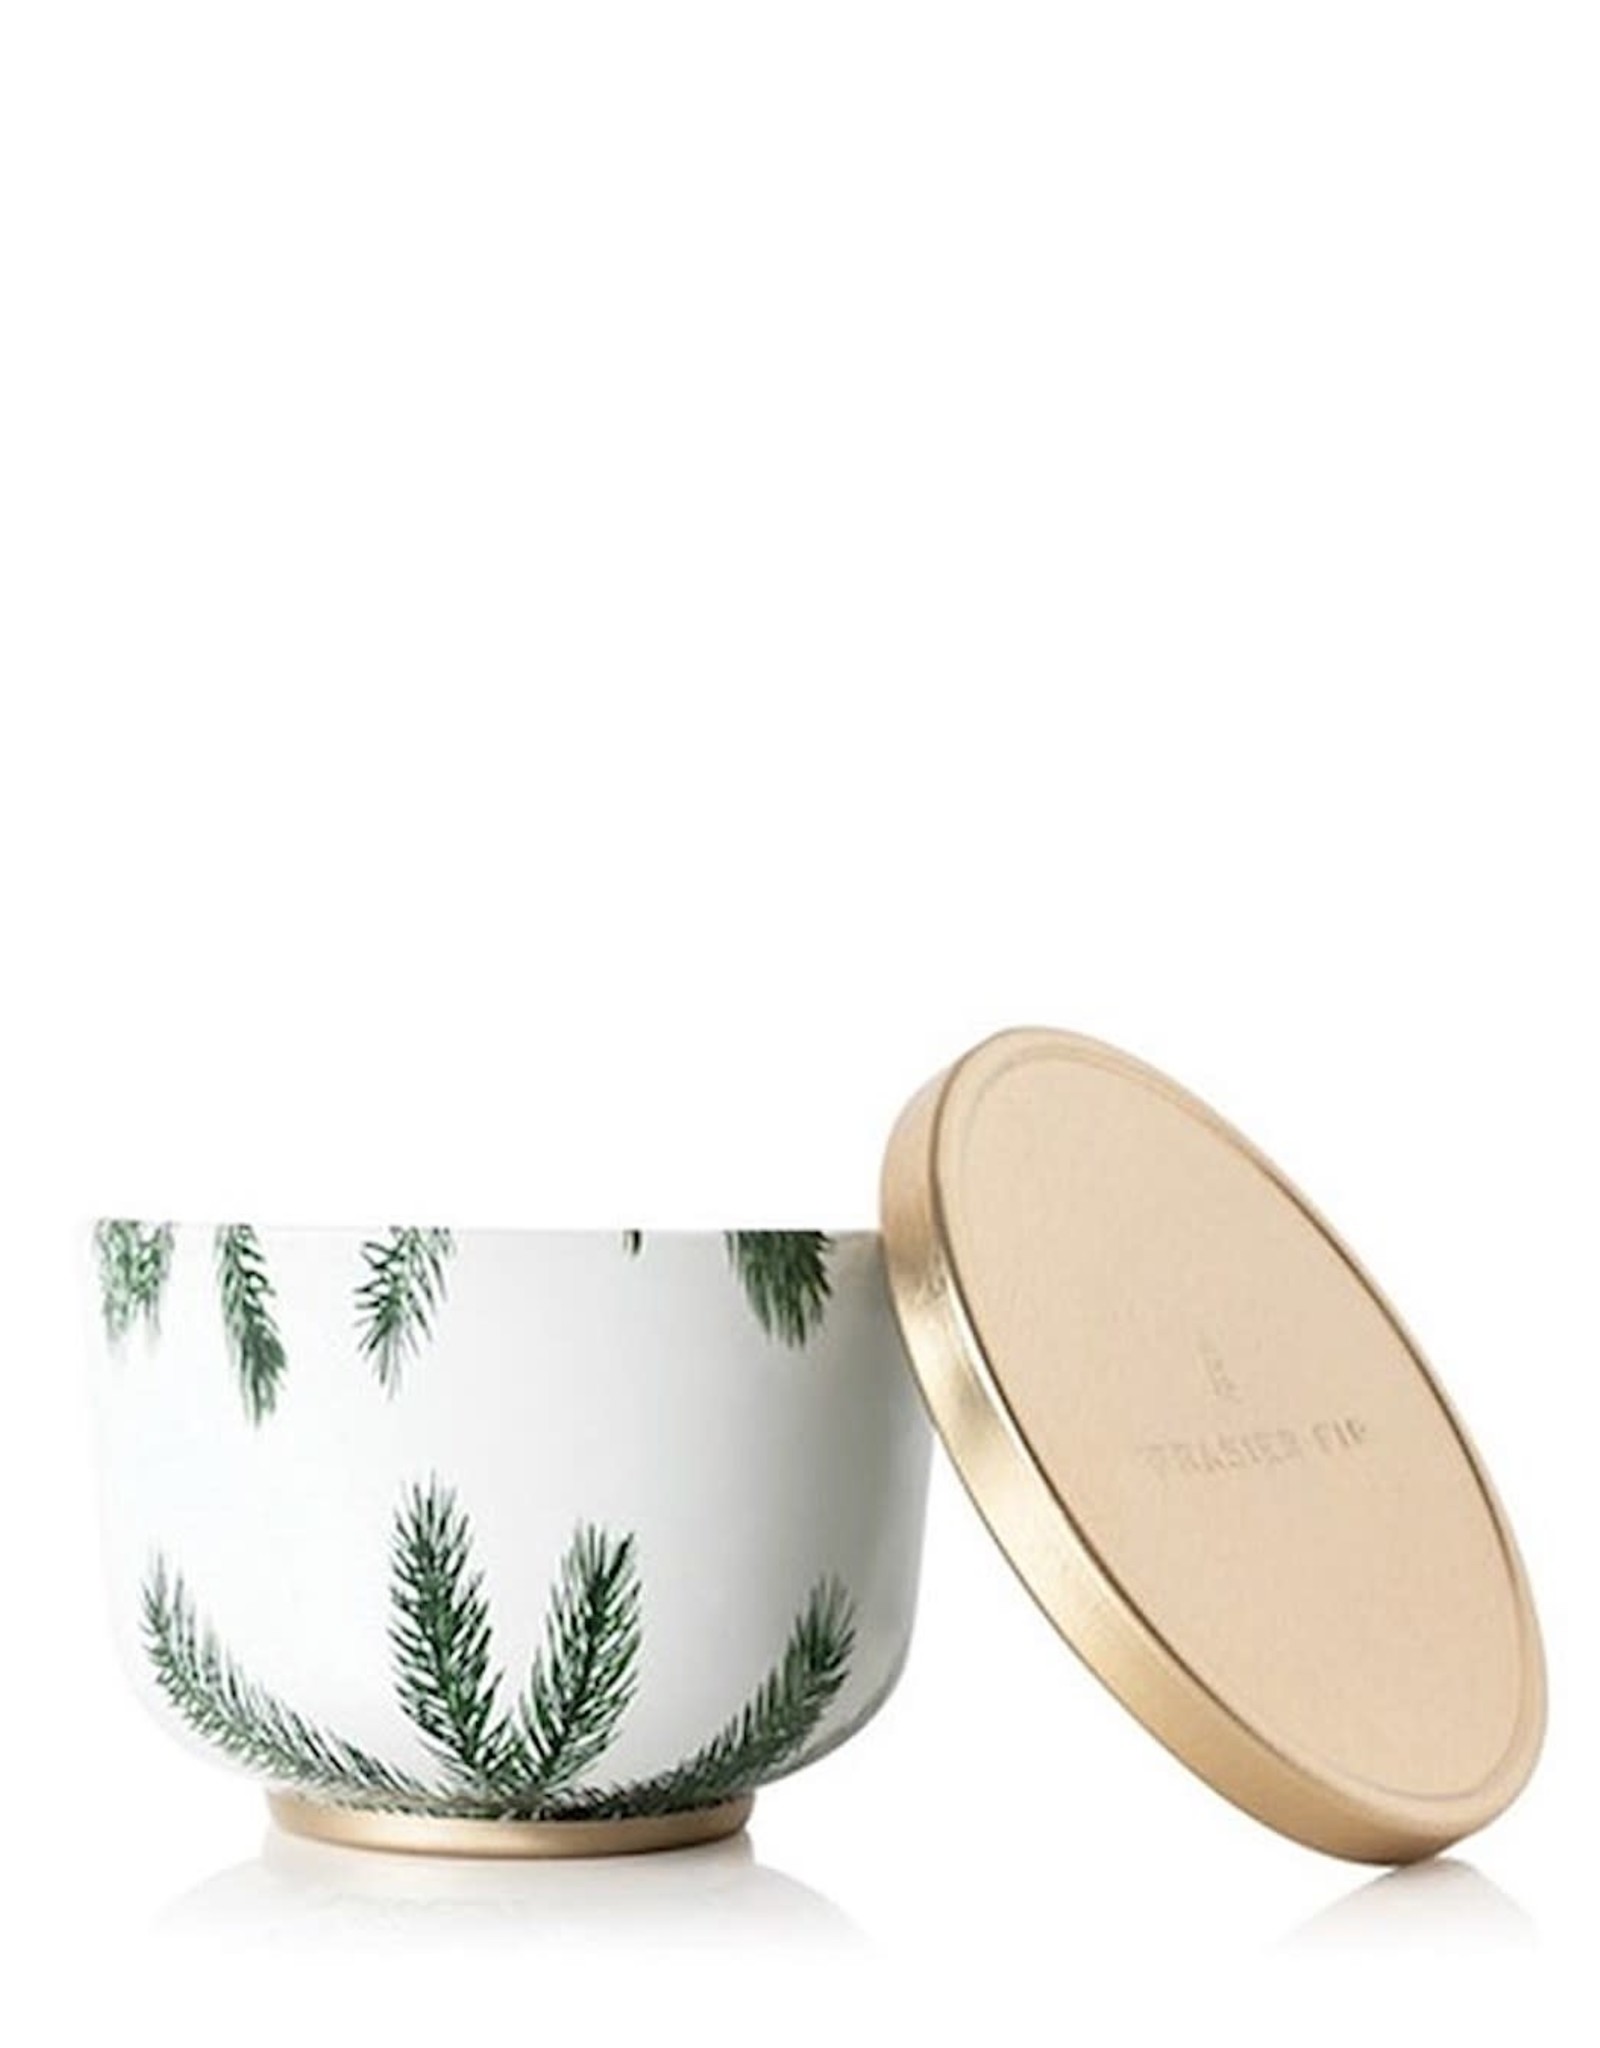 Frasier Fir Poured Candle Tin With Gold Lid 6.5 Oz